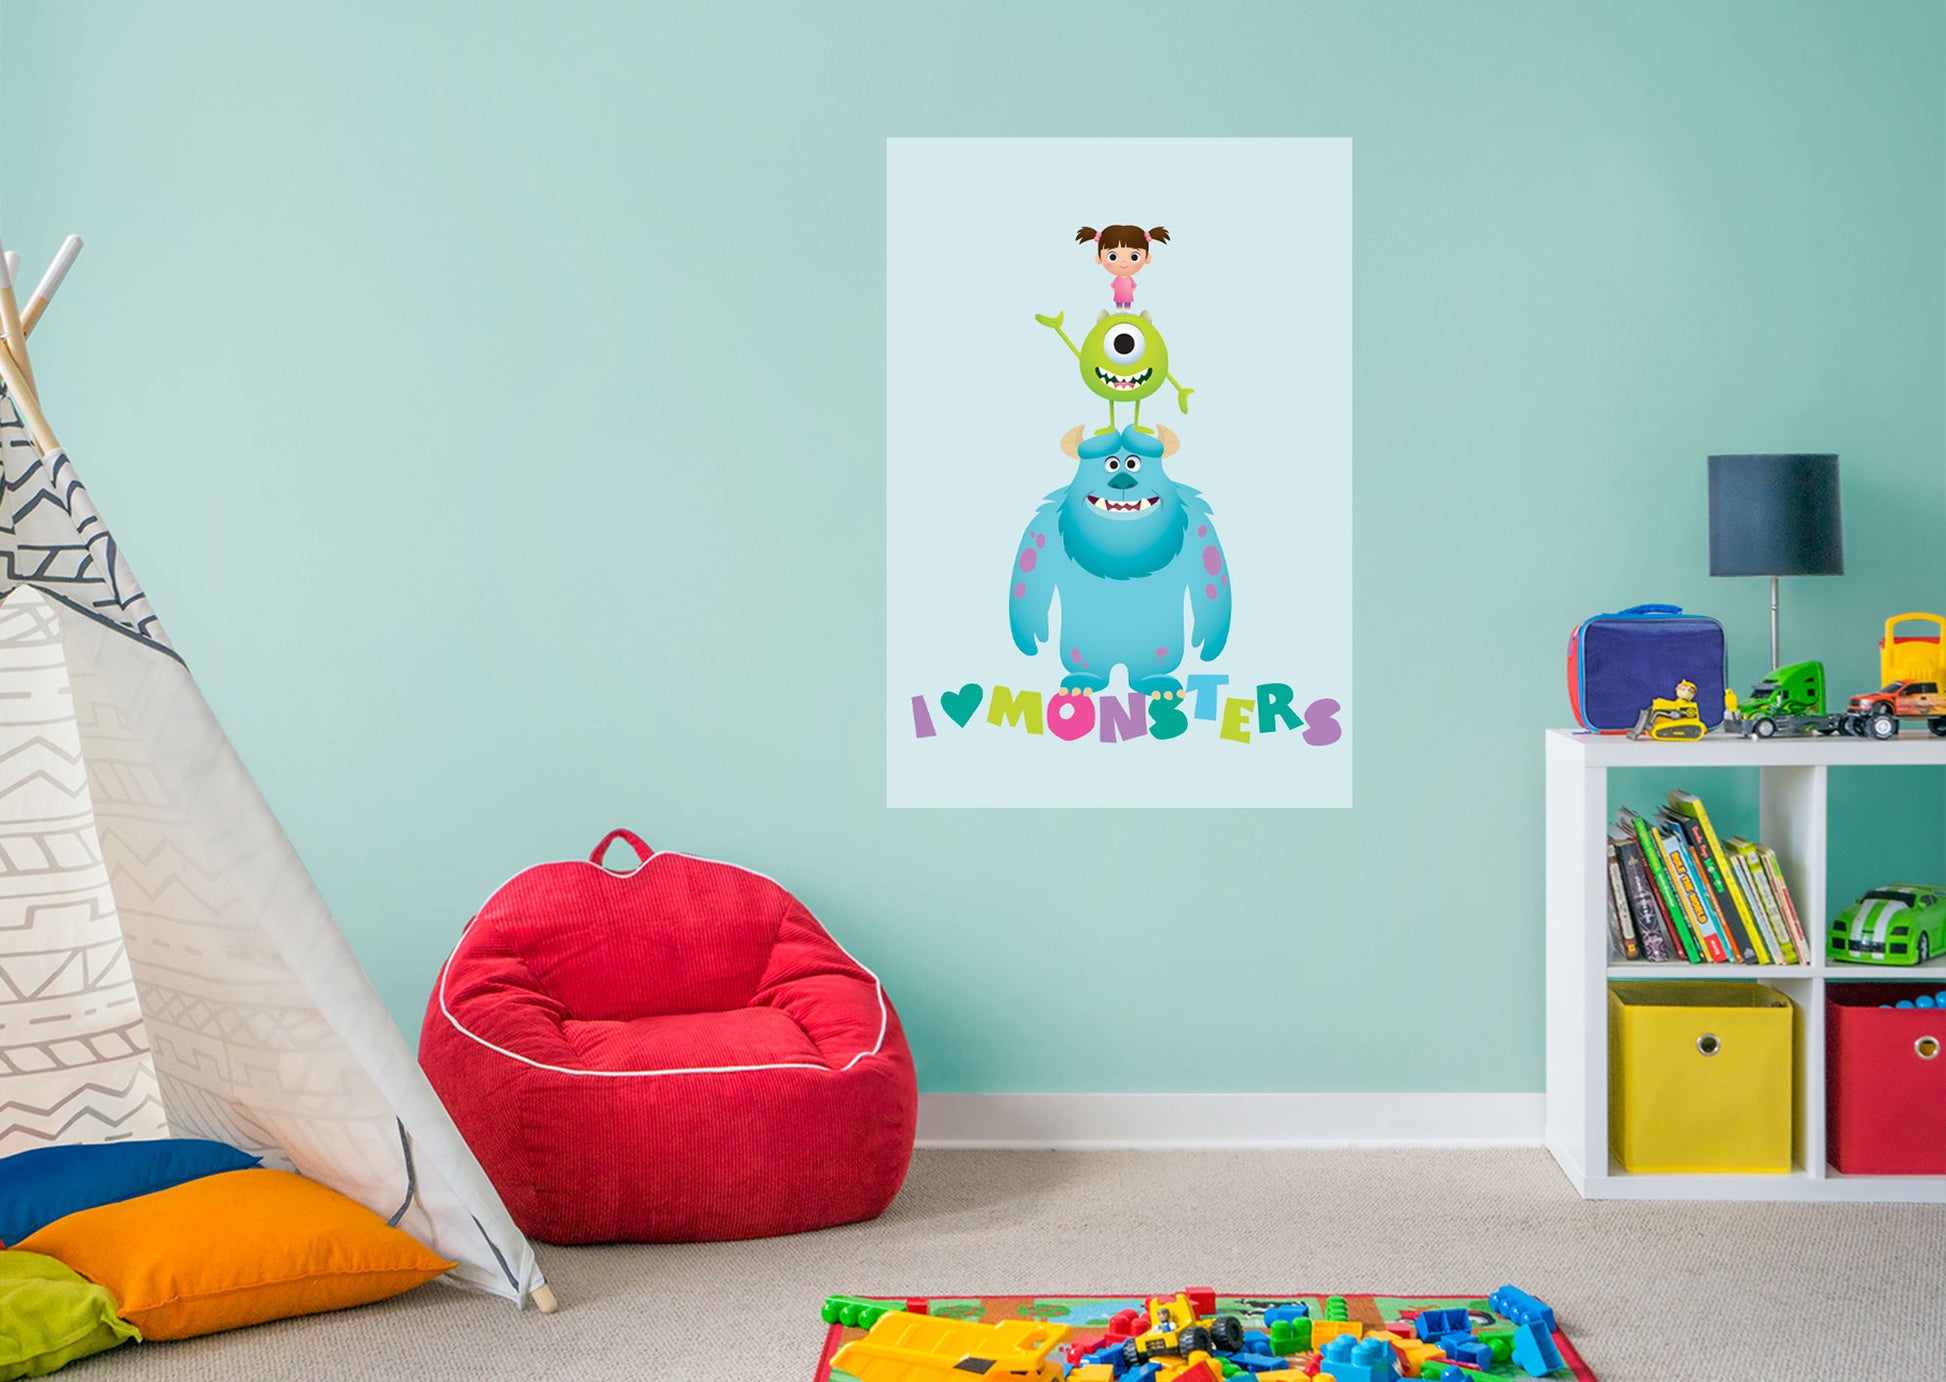 GIRL'S ROOM – tagged team-monsters-inc – Fathead